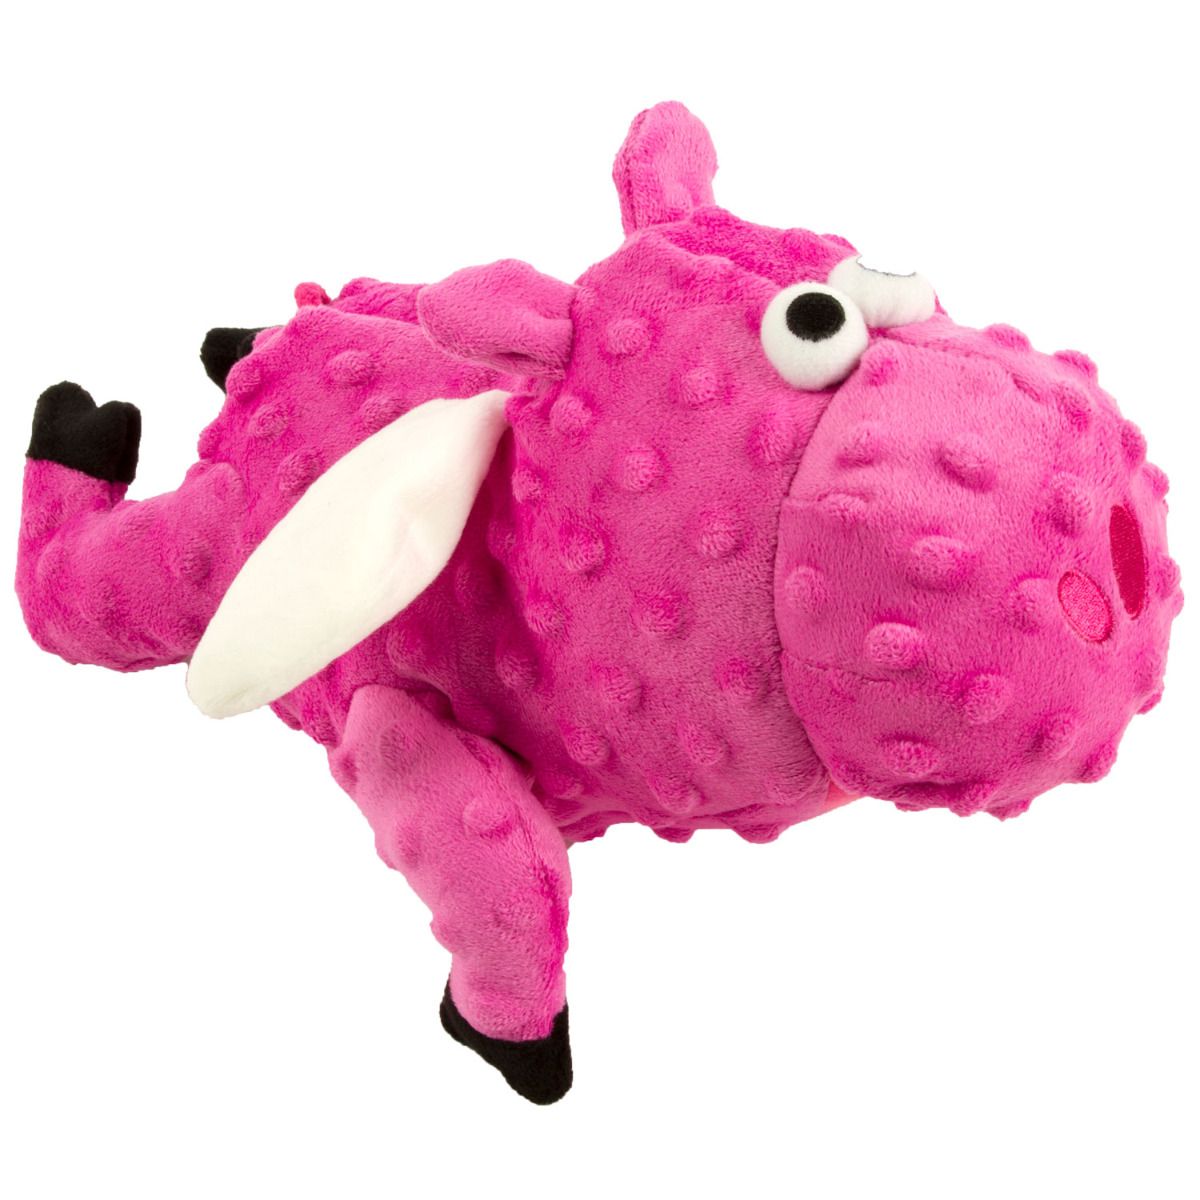 goDog Checkers Flying Pig Durable Squeaky Plush Dog Toy